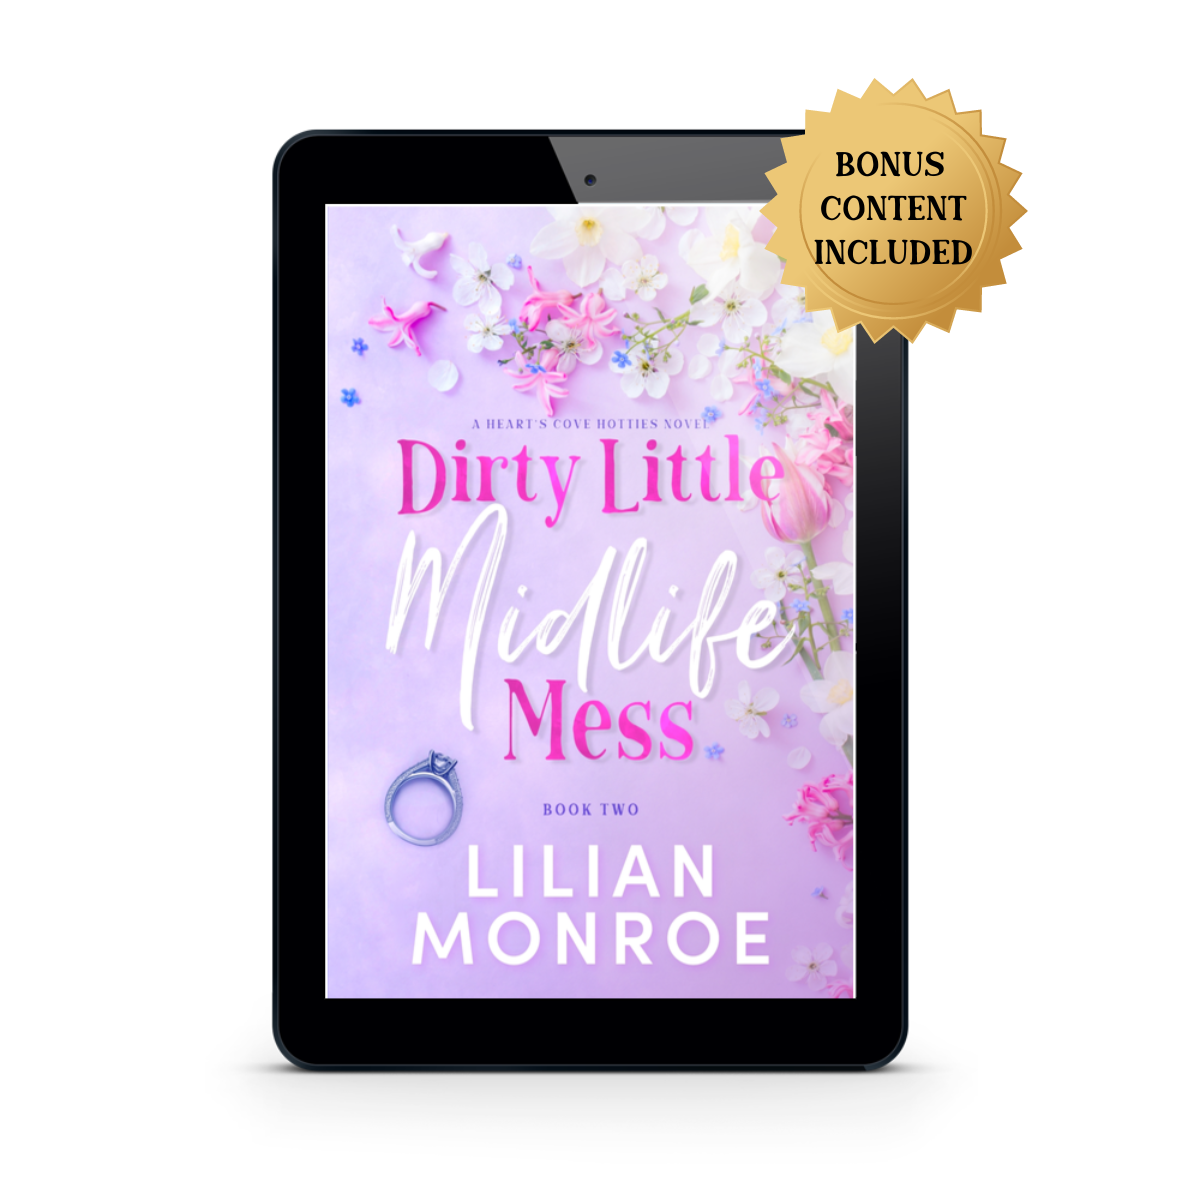 Heart's Cove Hotties Book 2: Dirty Little Midlife Mess